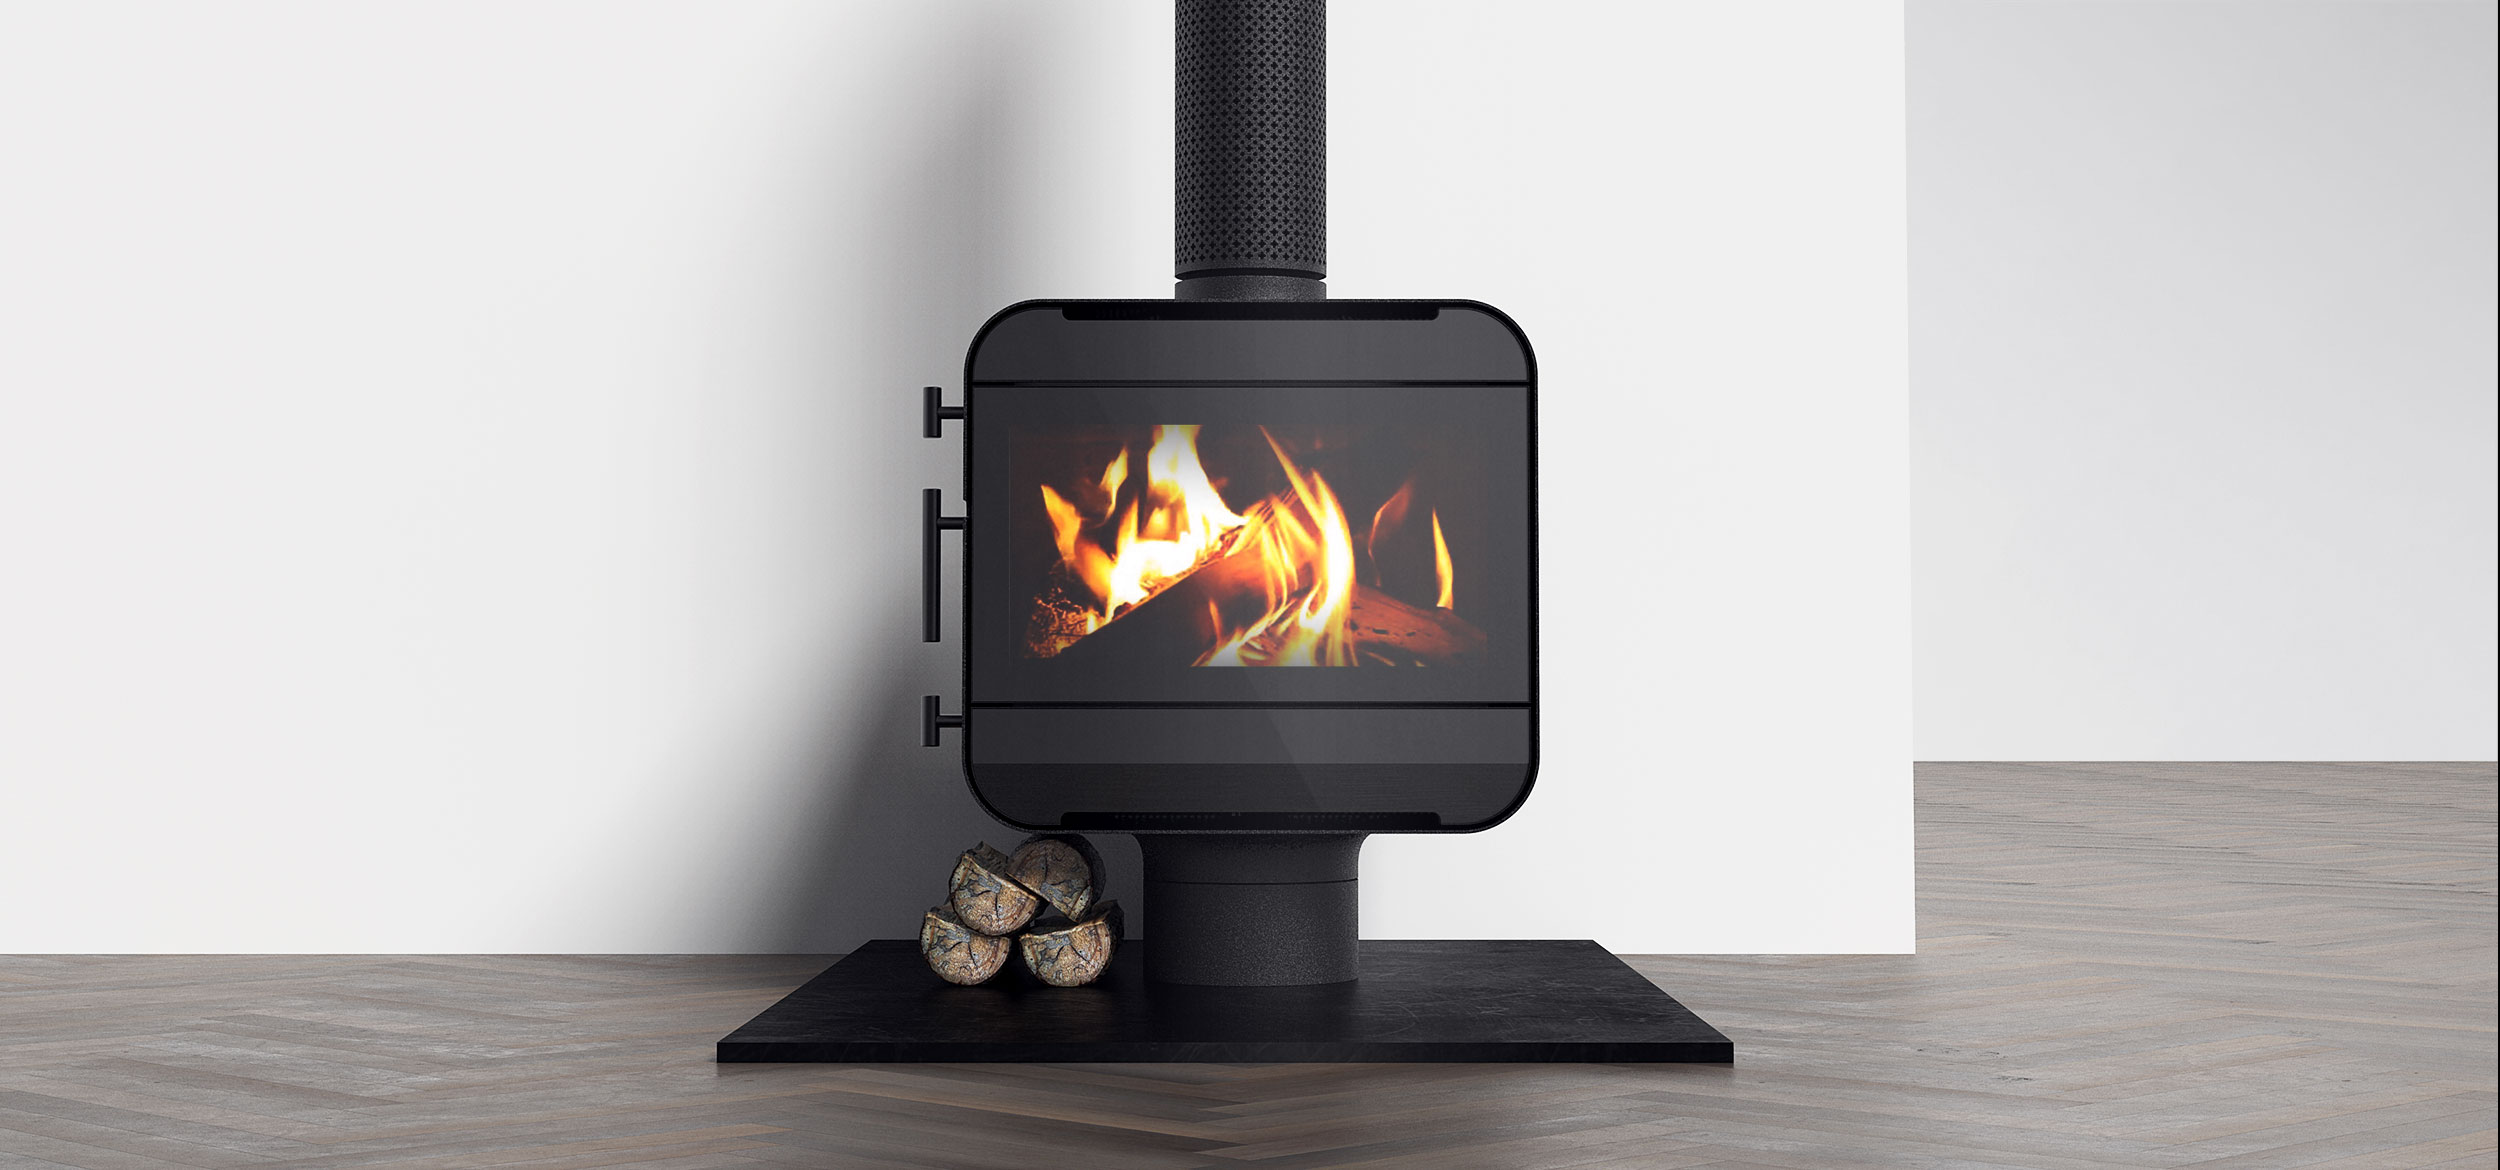 Buy Austwood Lachlan Freestanding Wood Heater at Barbeques Galore.